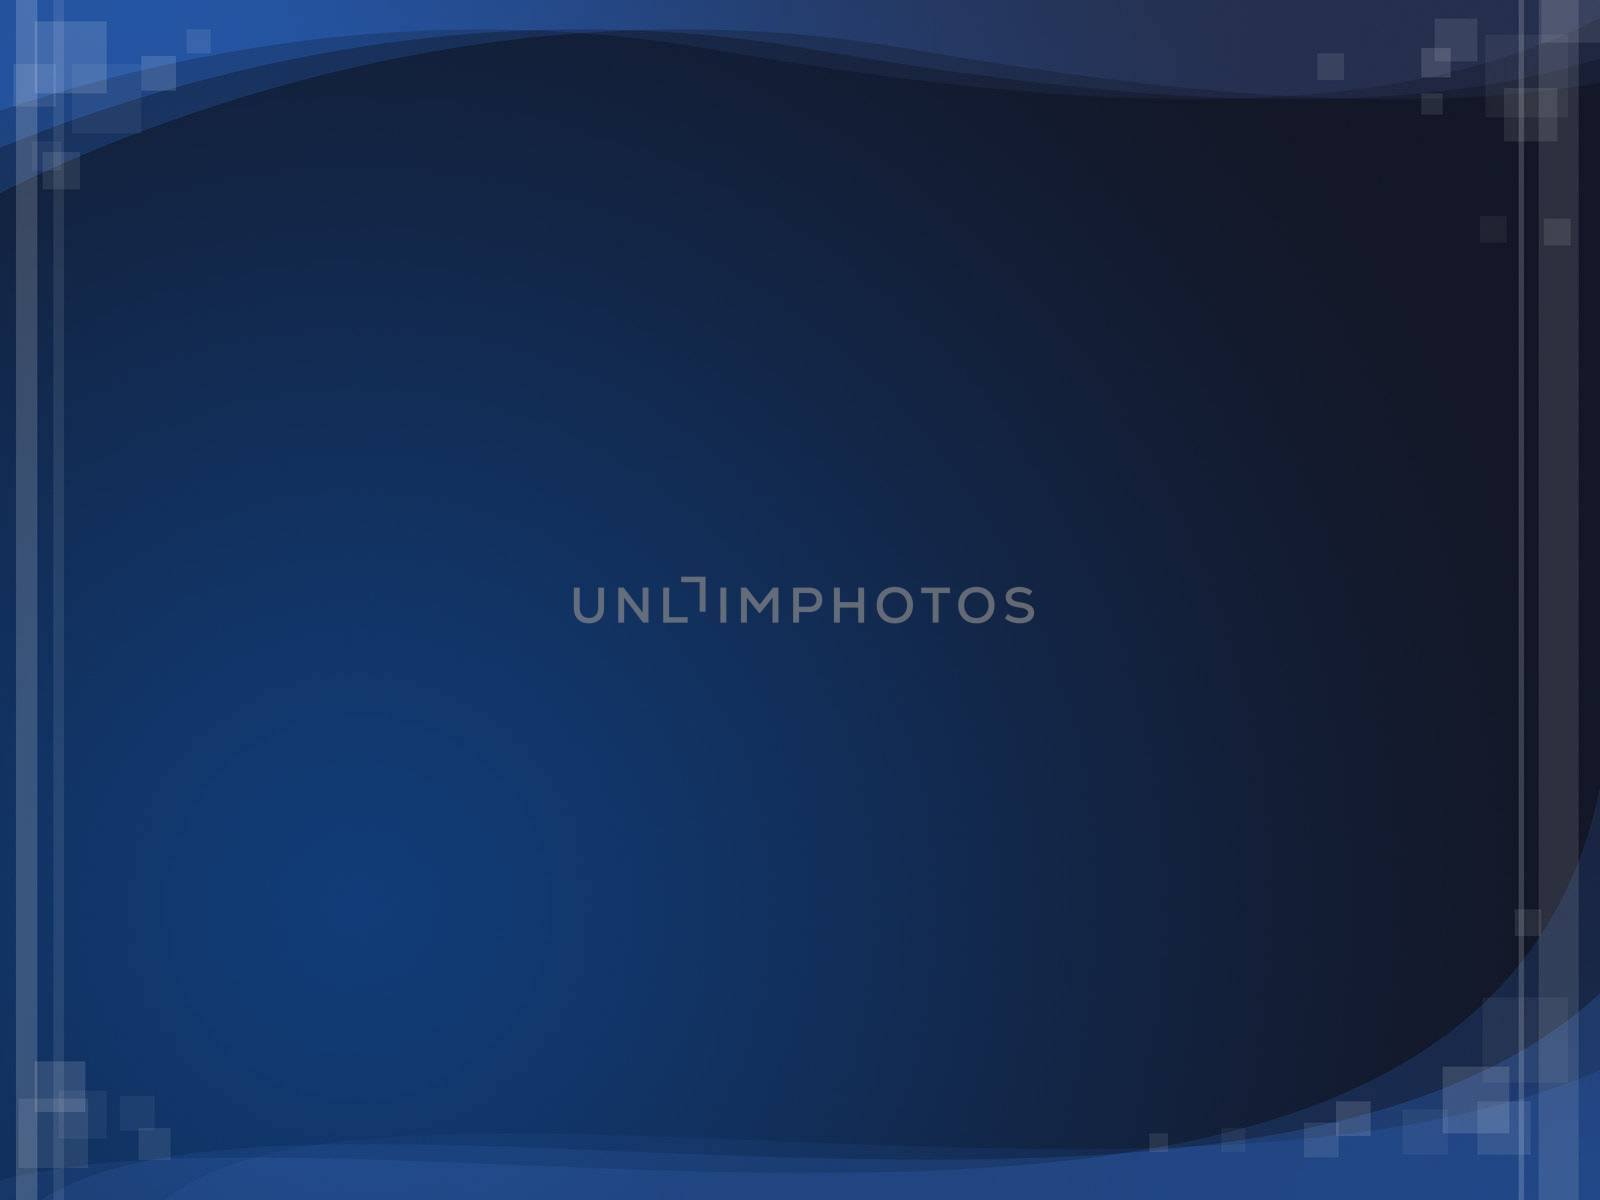 Blue wallpaper / background for your powerpoint presentations

